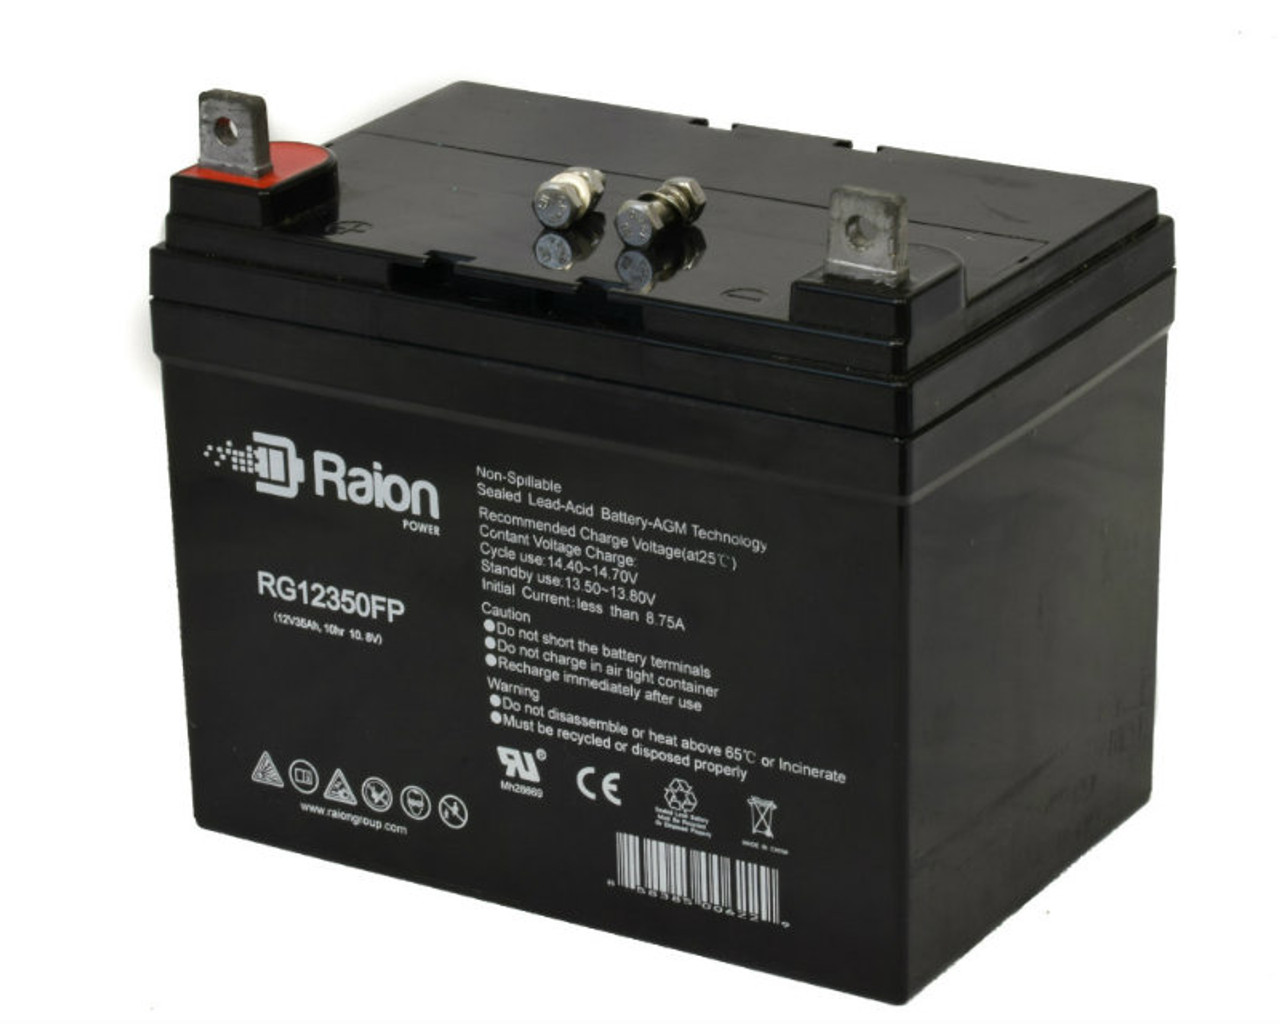 Raion Power Replacement 12V 35Ah Battery for Ariens/Gravely 914000 - 1 Pack